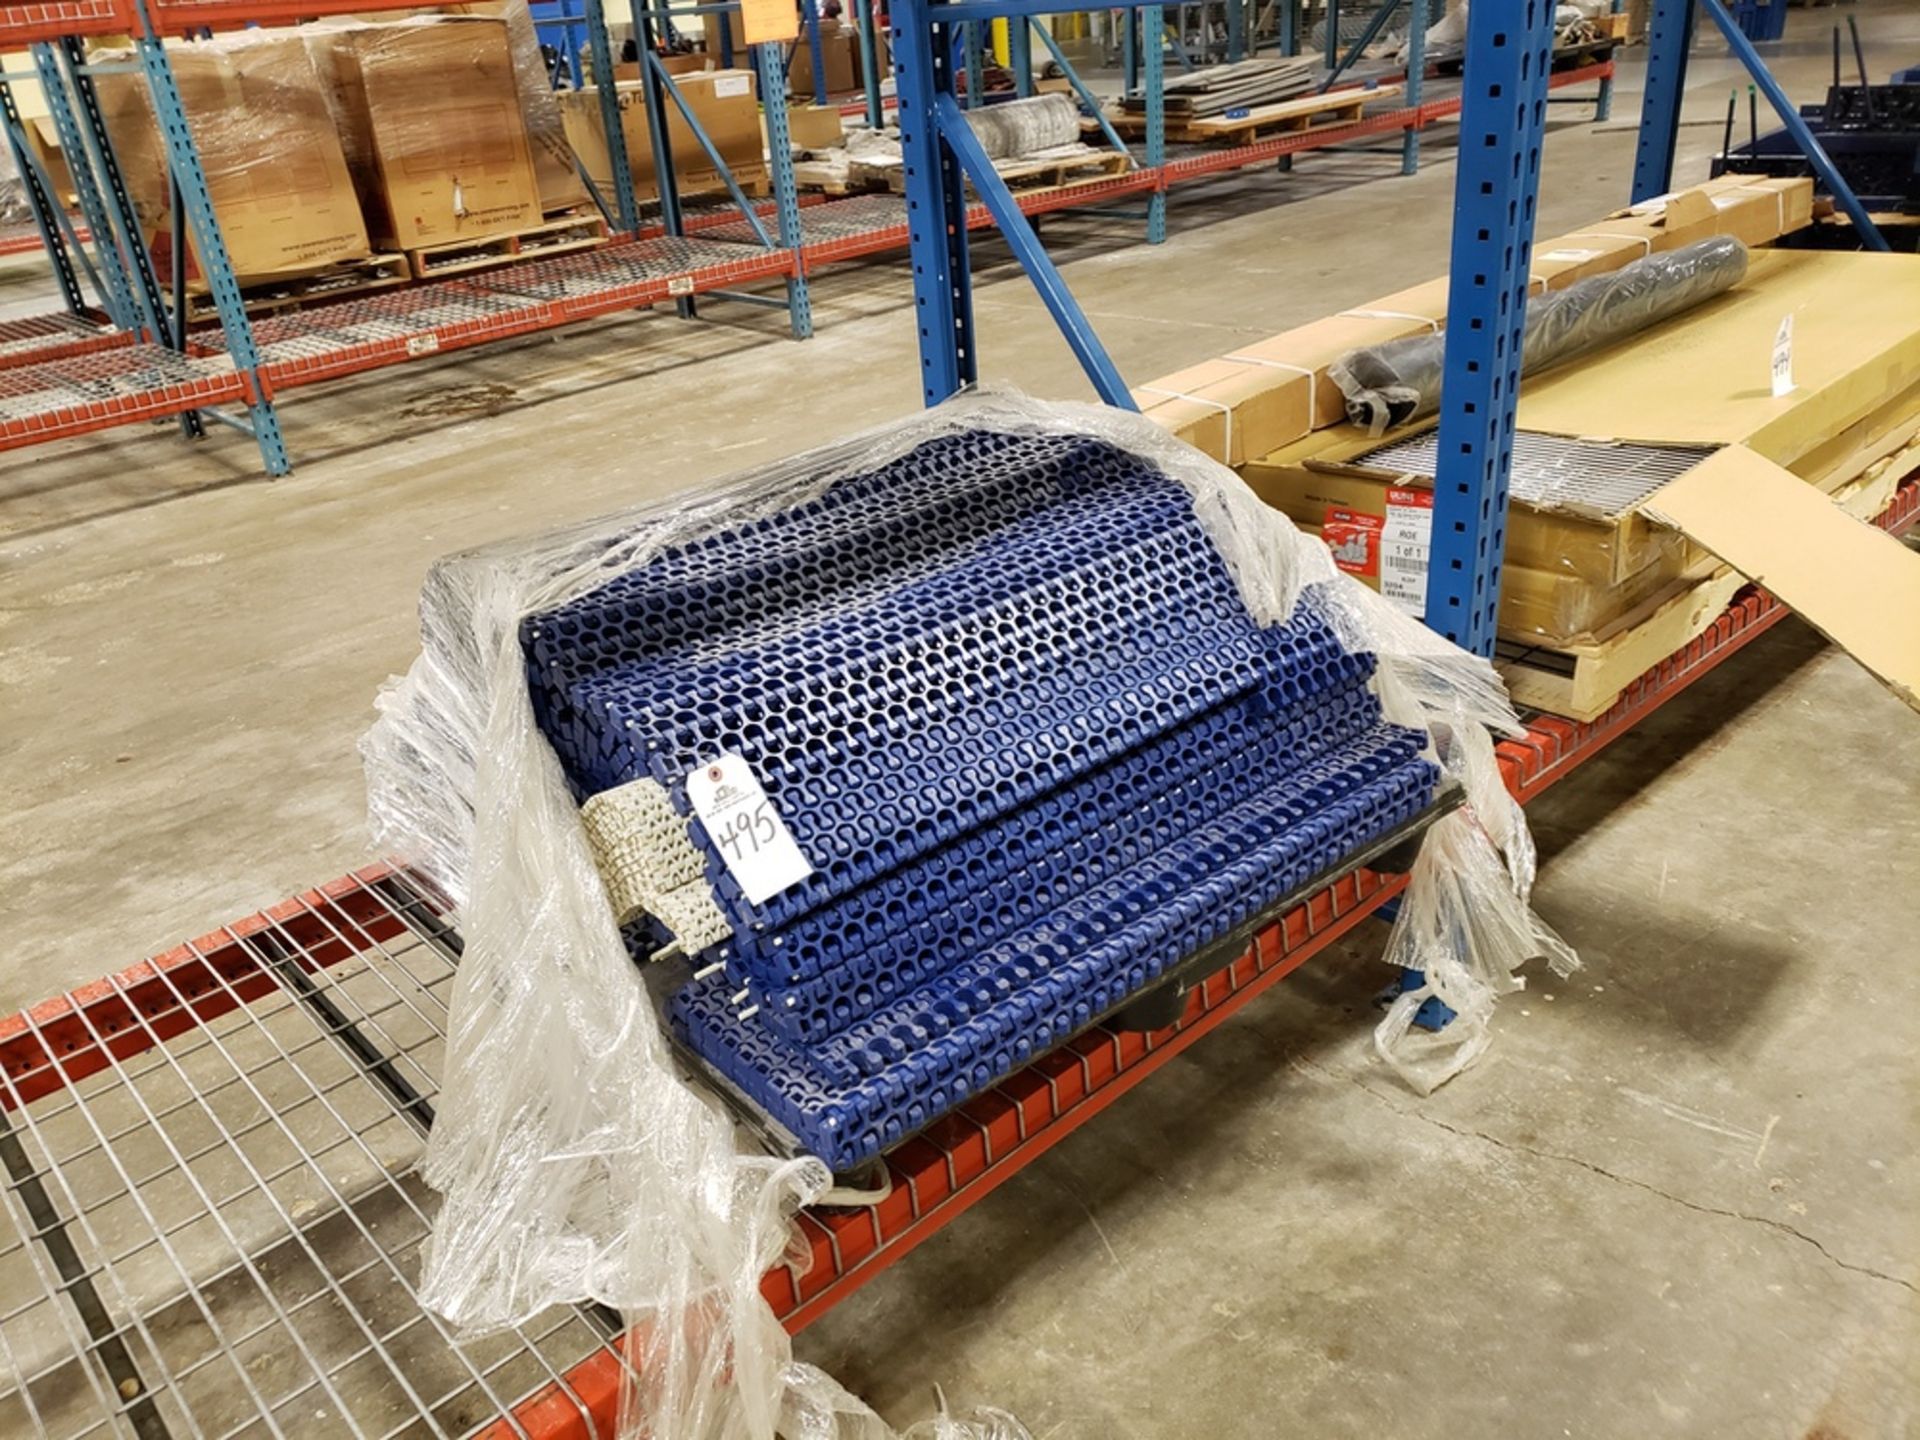 Lot of Conveyor Belting, 39 1/2" - Subject to Bulk Lot 458A - The greater of the | Rig Fee: $25